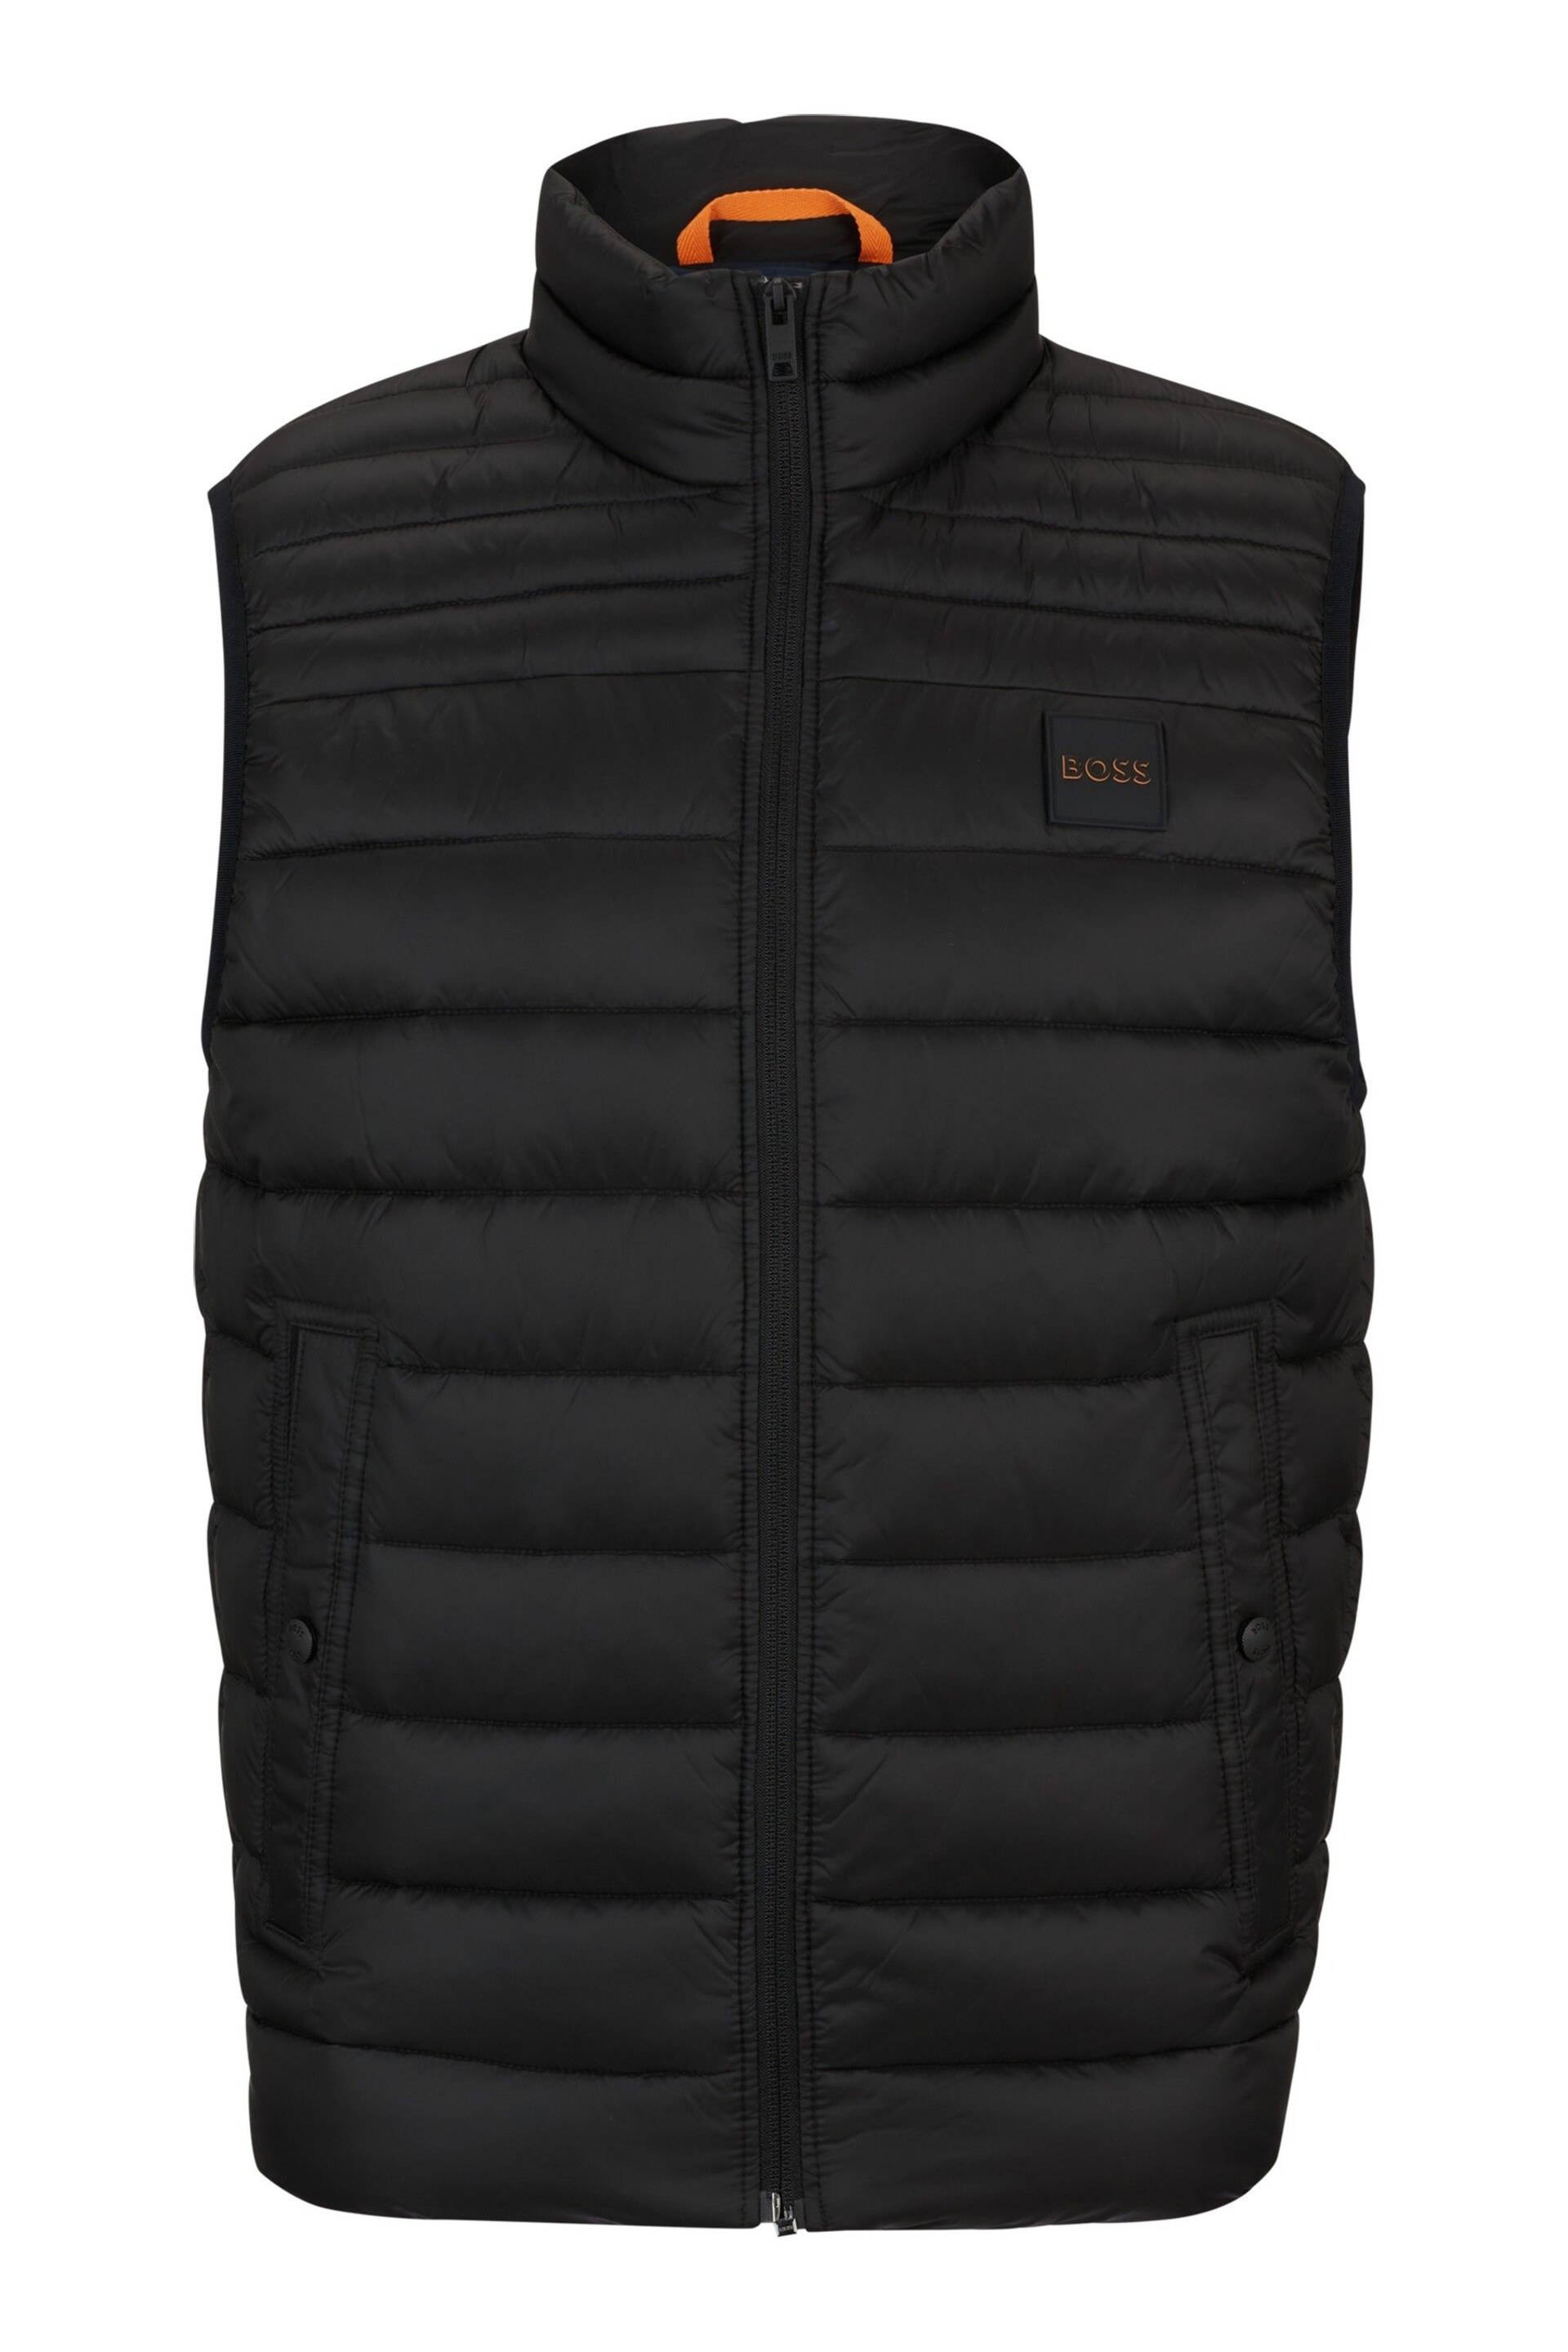 BOSS Black Lightweight Padded Gilet With Water-Repellent Finish - Image 6 of 6